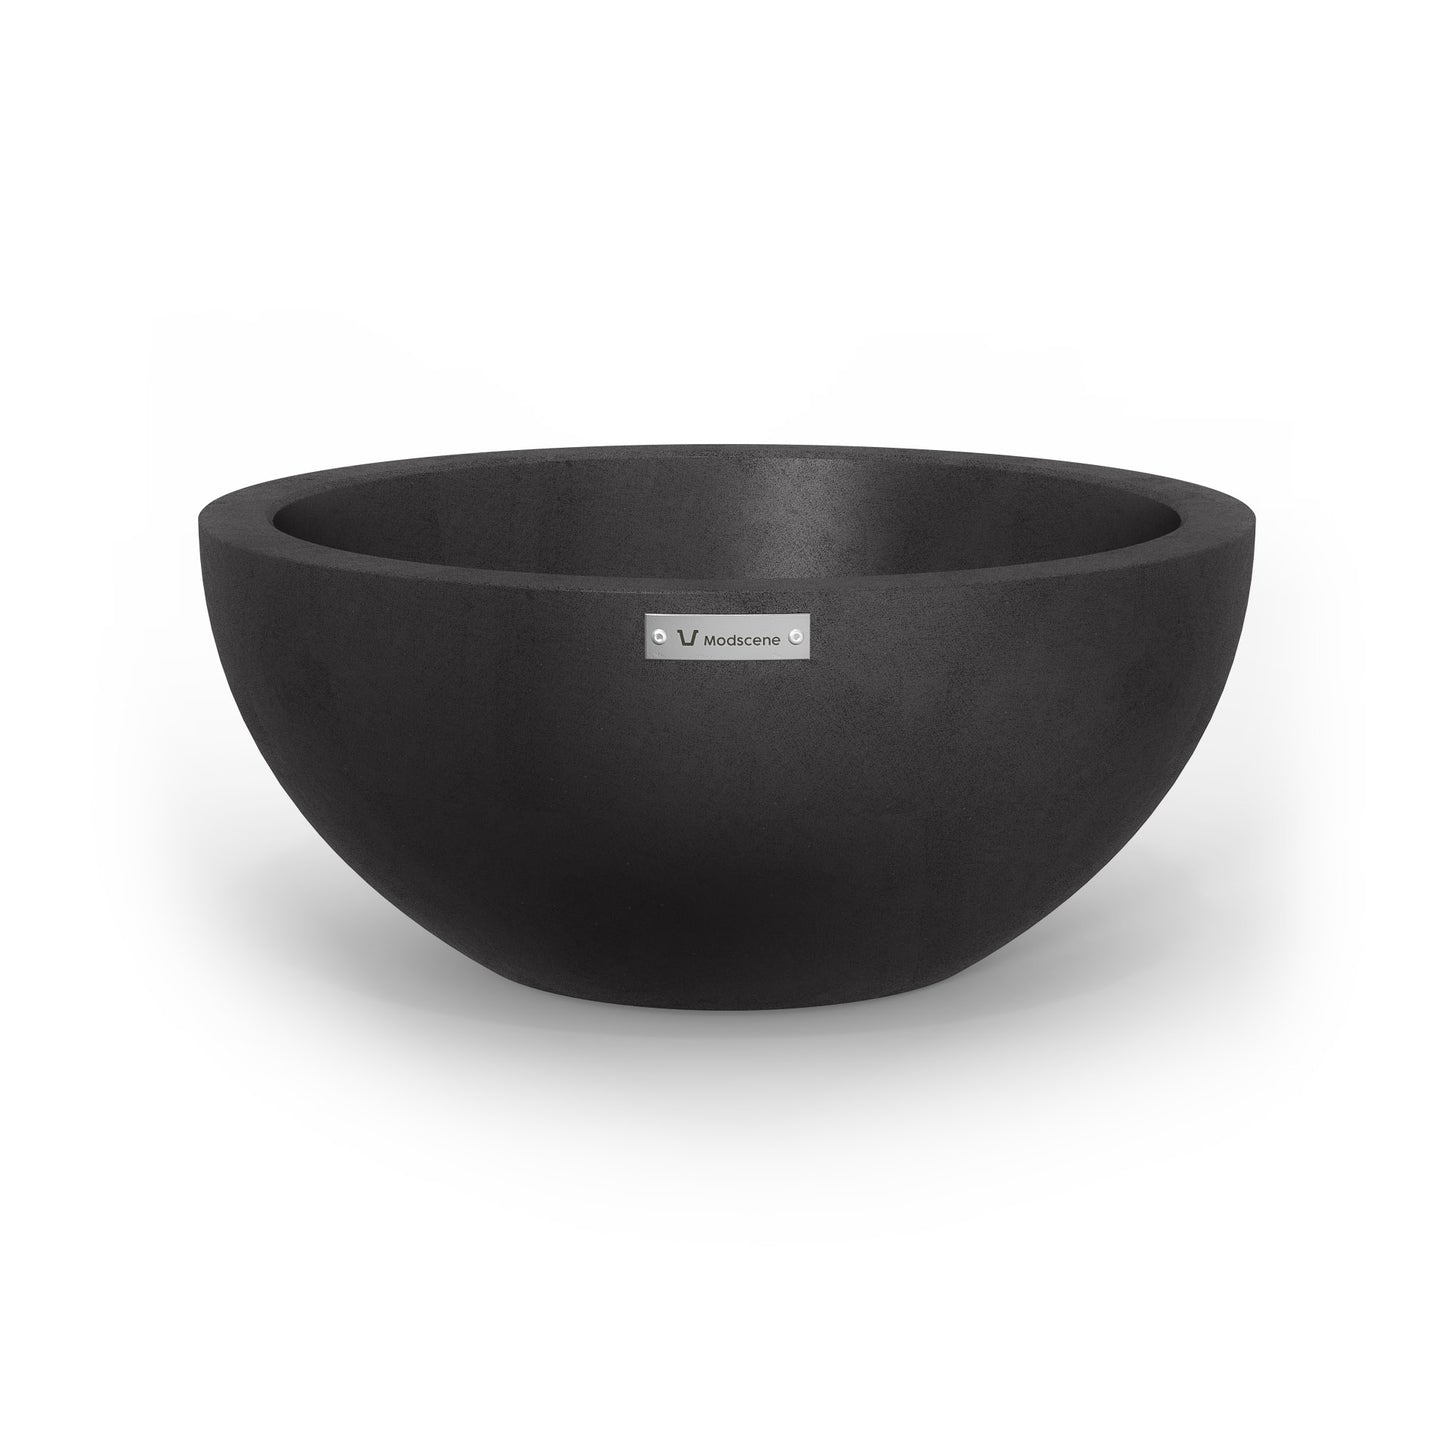 A small planter bowl in a matte black colour made by Modscene.